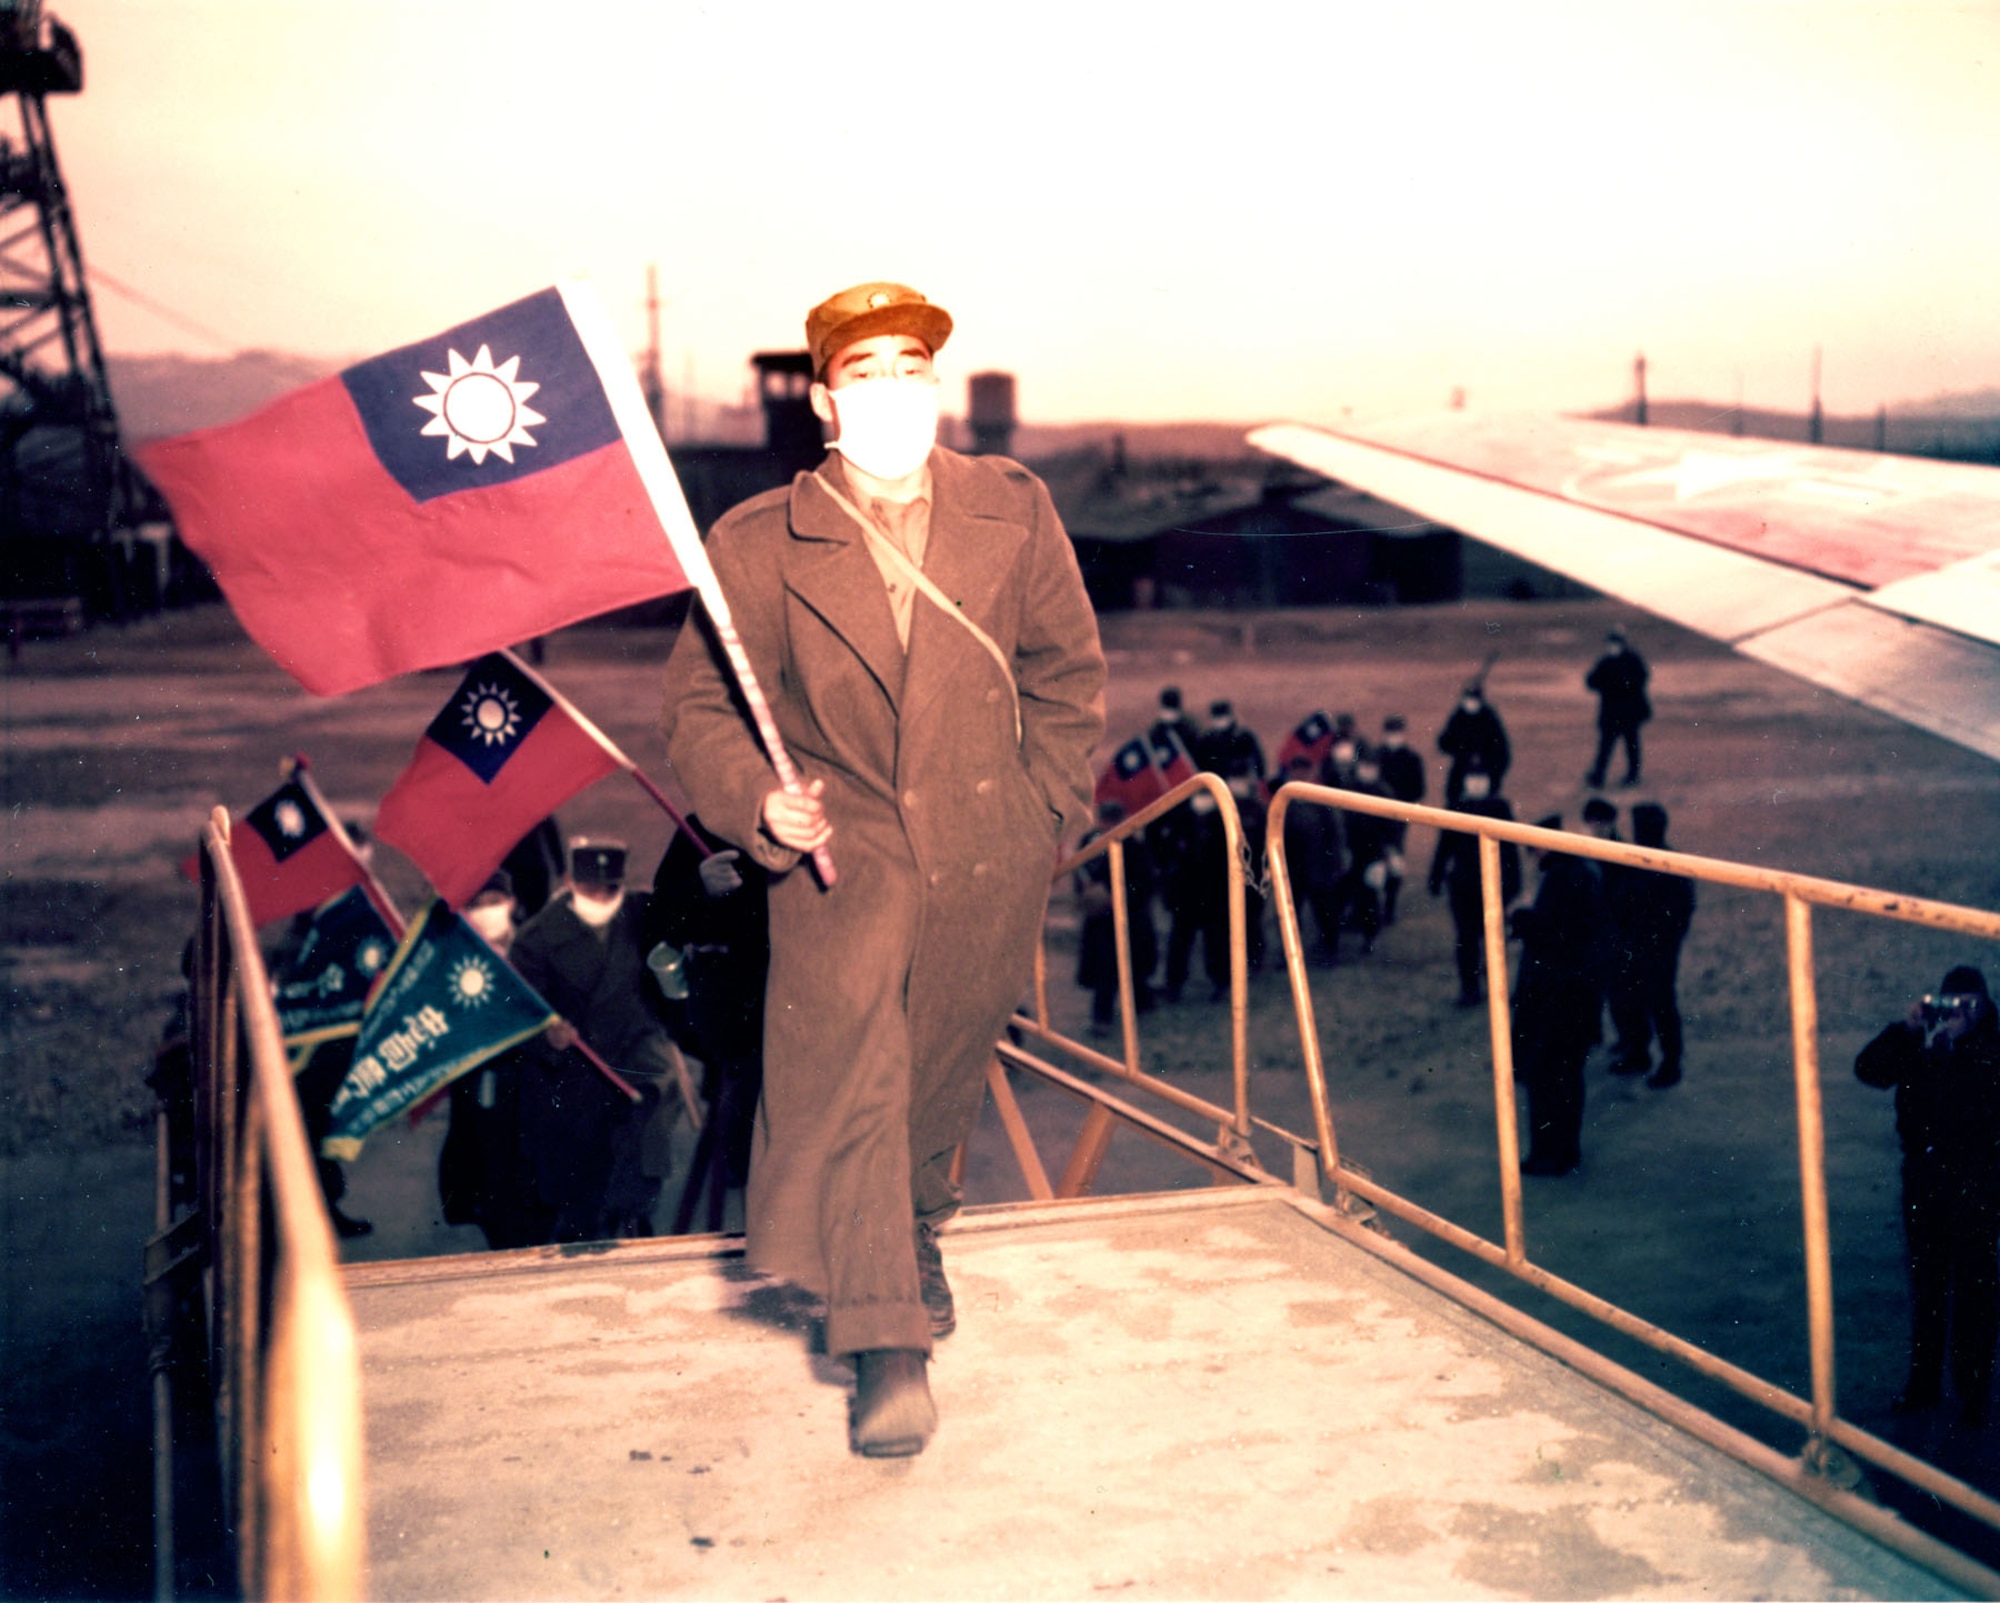 Recently released Chinese POWs carrying Taiwanese flags board a USAF transport in January 1954 for the flight to Taiwan and freedom after renouncing communism. Those communist POWs who returned to China and North Korea faced uncertain futures -- they were regarded as traitors for being captured. (U.S. Air Force photo)